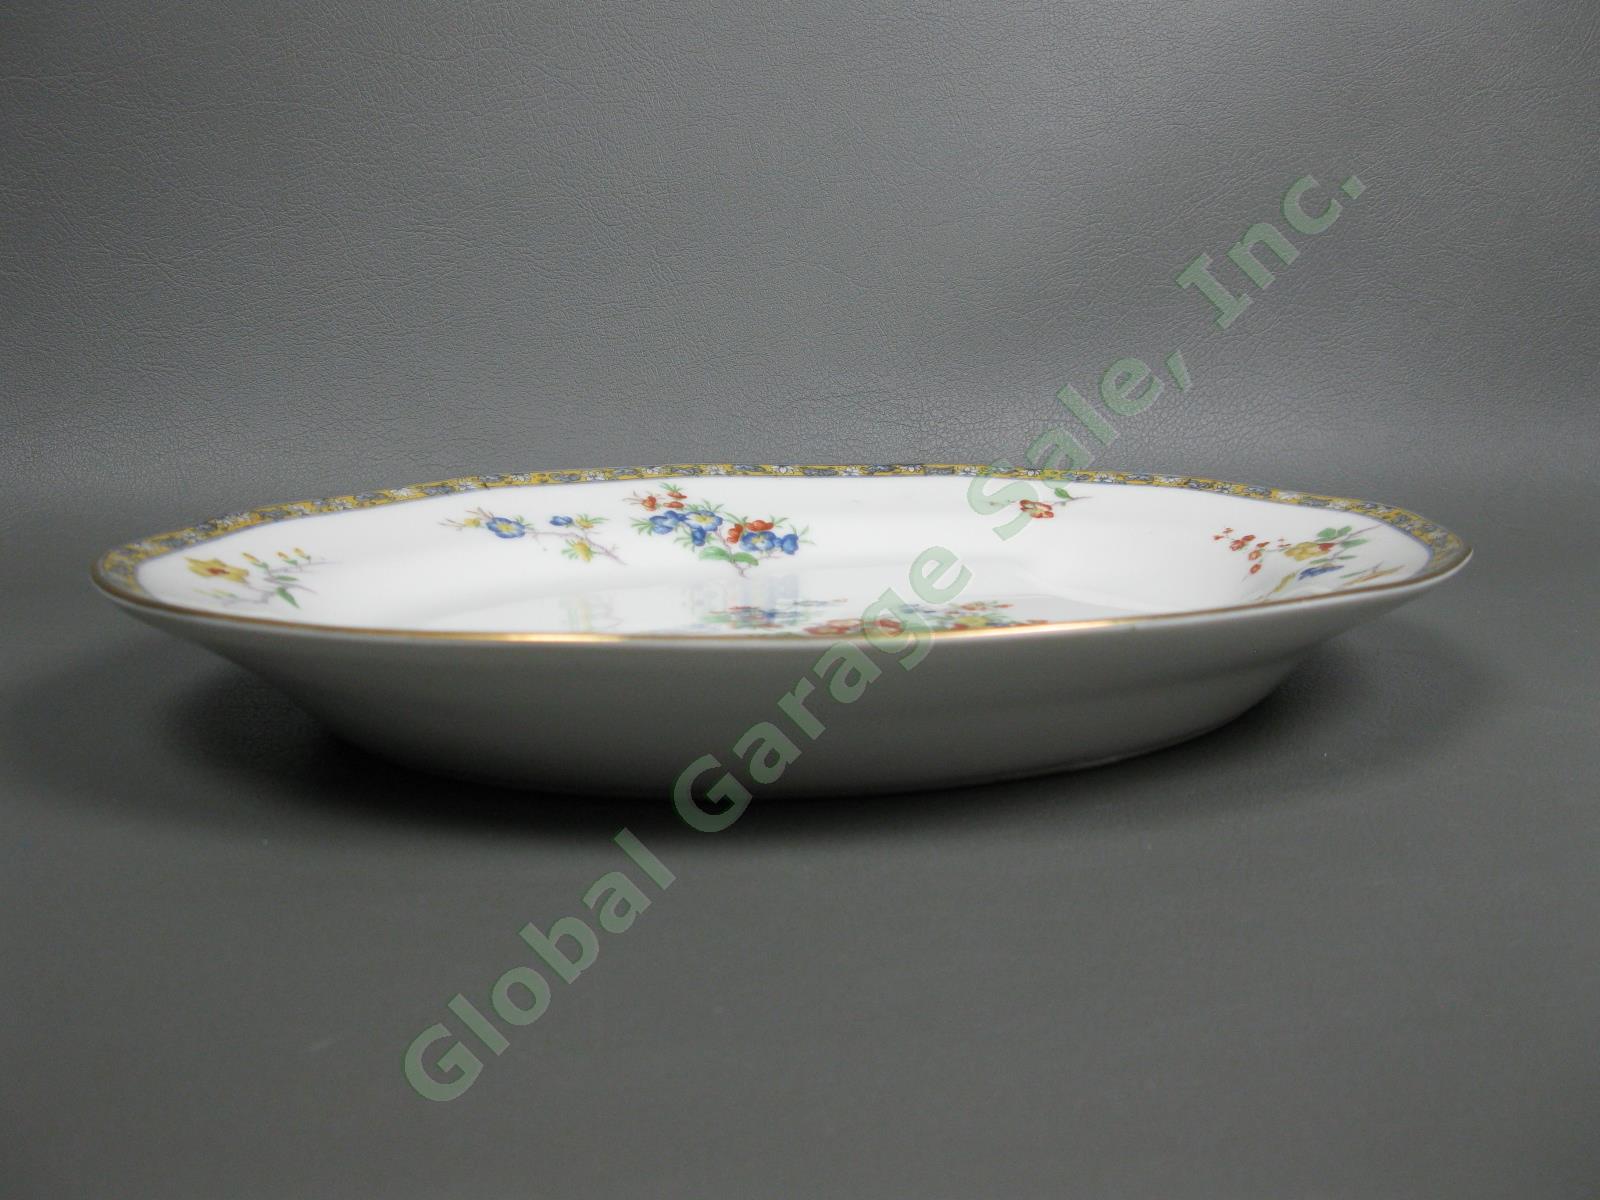 Theodore Haviland Montreux Mongolia 11" Oval Serving Platter Floral Tray Limoges 6